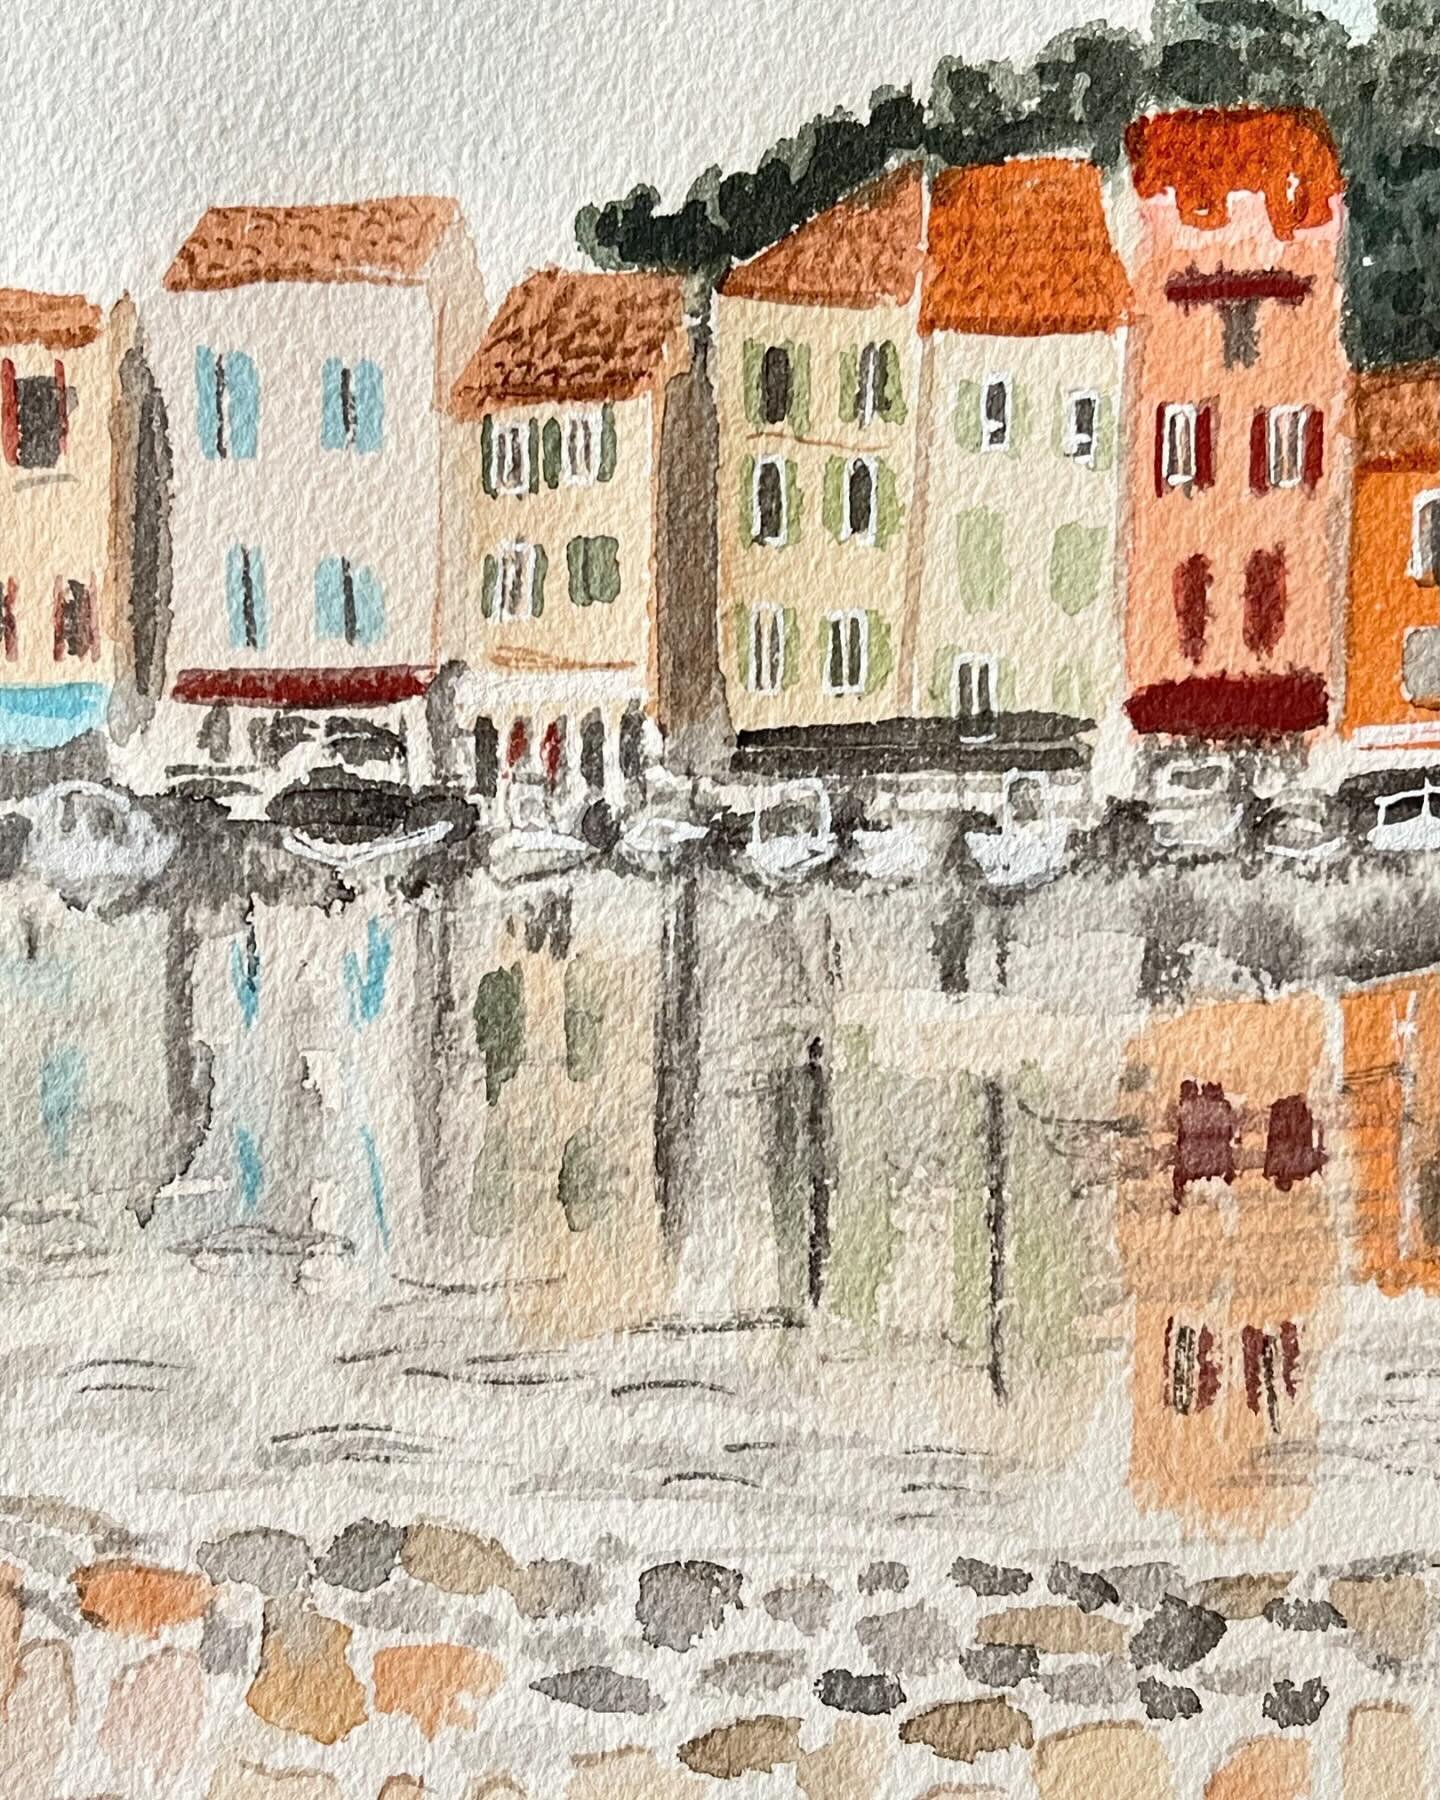 A scene from the boat launch in Cassis, a town on the French Riviera. This painting is part of the current show at @thescoutedstudio and I&rsquo;m so proud to be featured with so many wonderful artists! Comment &ldquo;Cassis&rdquo; and I will send yo